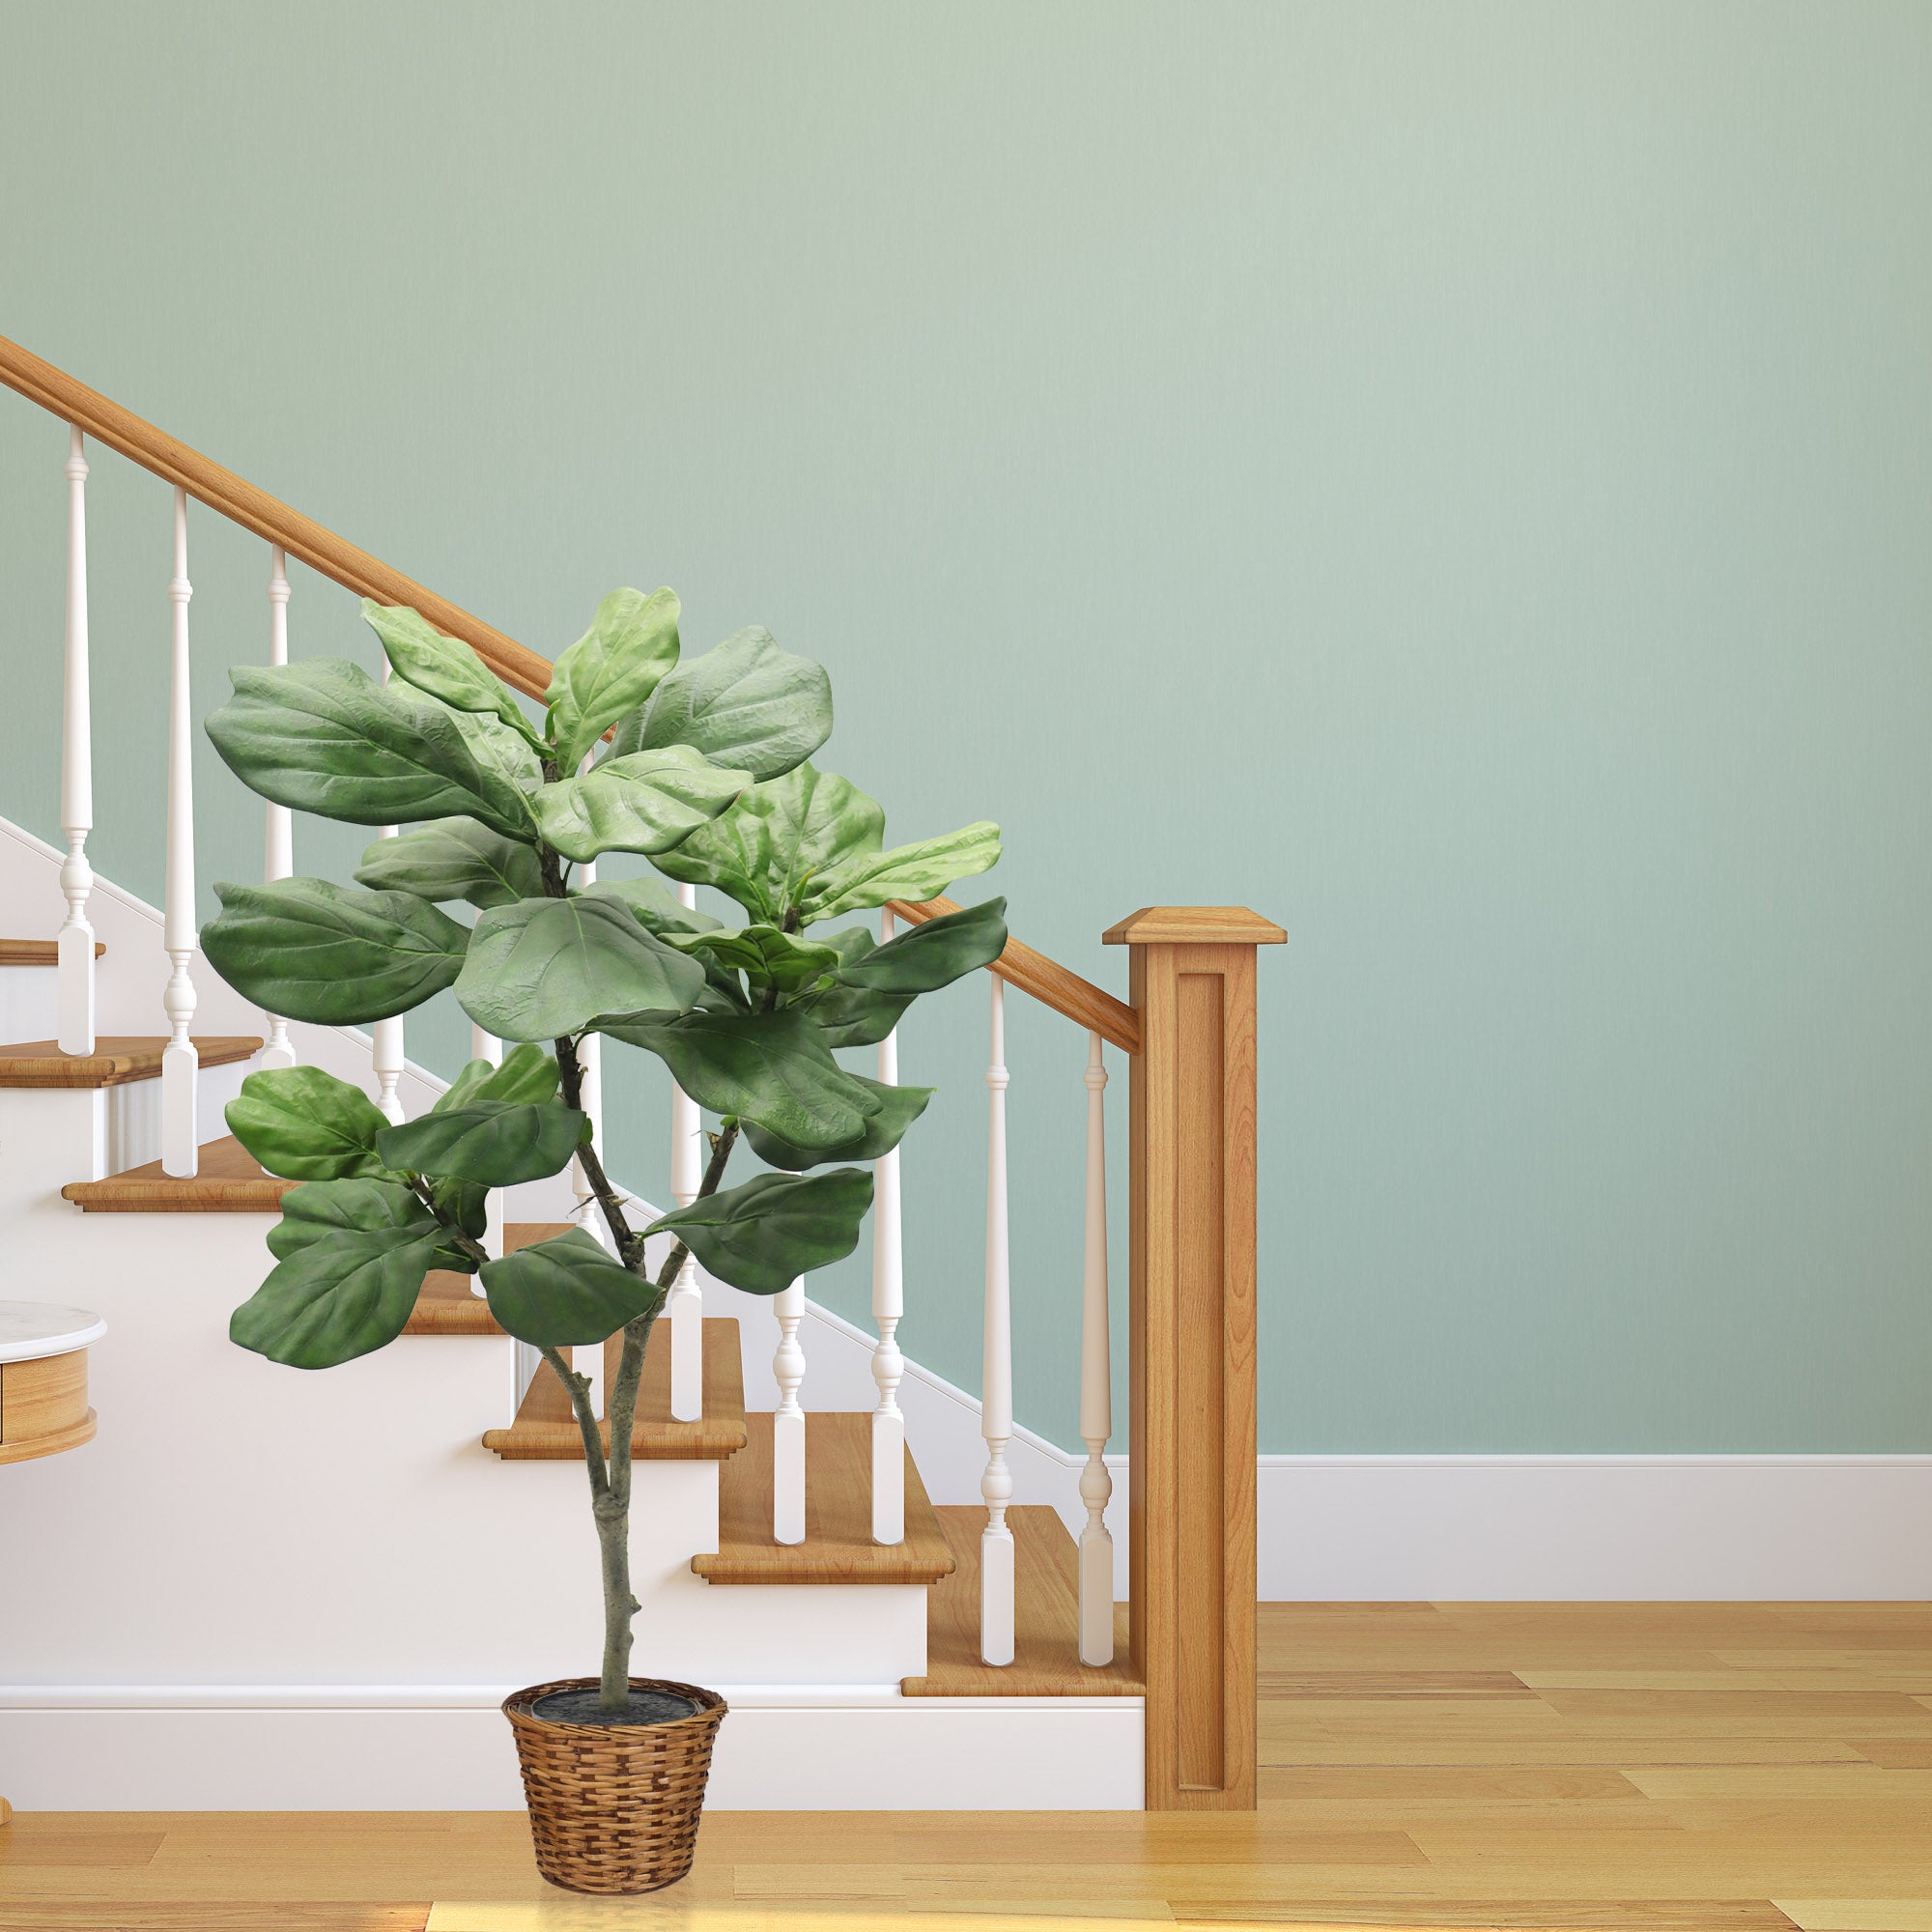 Silk Fiddle Leaf Fig Tree 26 Leaves , House Plant in Black Pot 4' House Plant ArtificialFlowers   